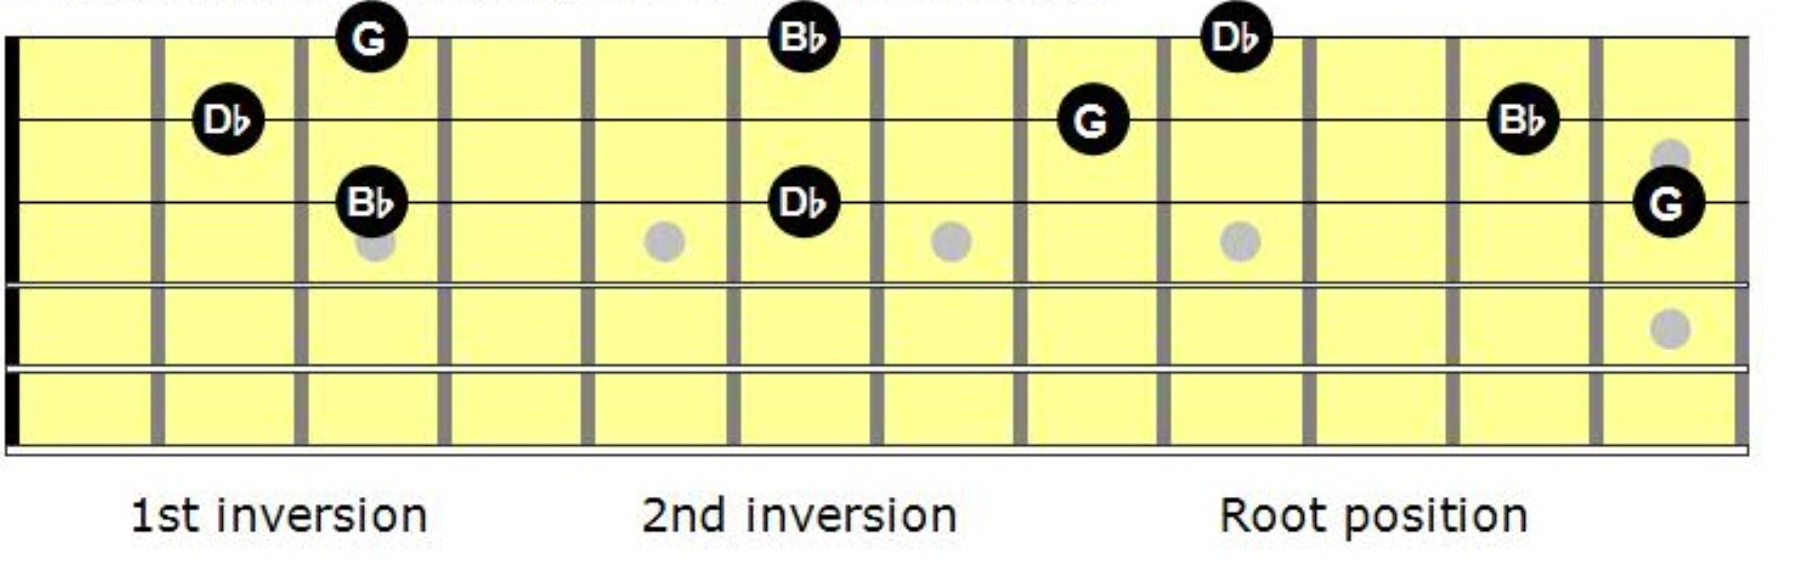 Diminished Chord Shapes on the D, G, and B Strings)